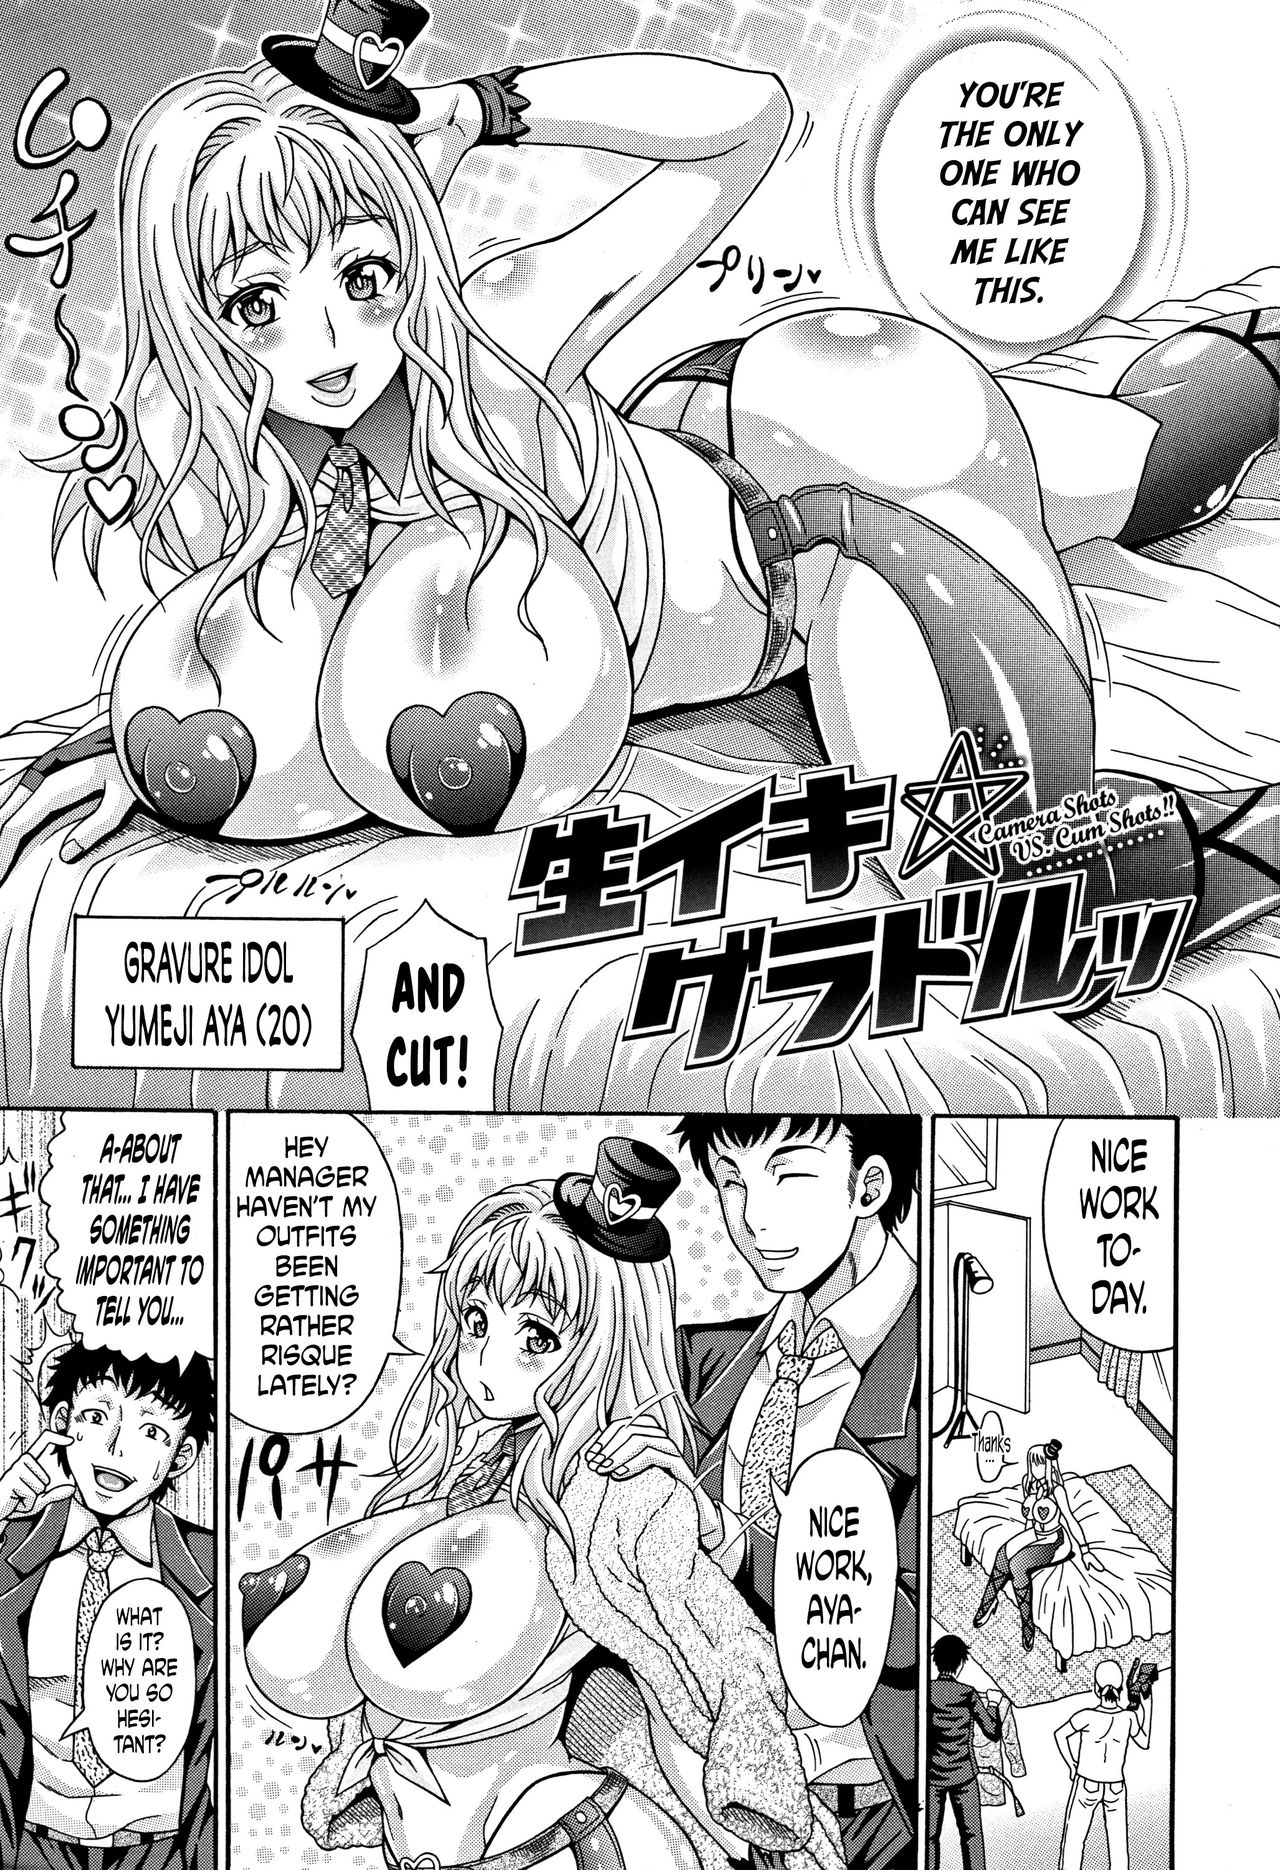 [Andou Hiroyuki] Mamire Chichi - Sticky Tits Feel Hot All Over. Ch.1-5 [English] [doujin-moe.us] page 6 full